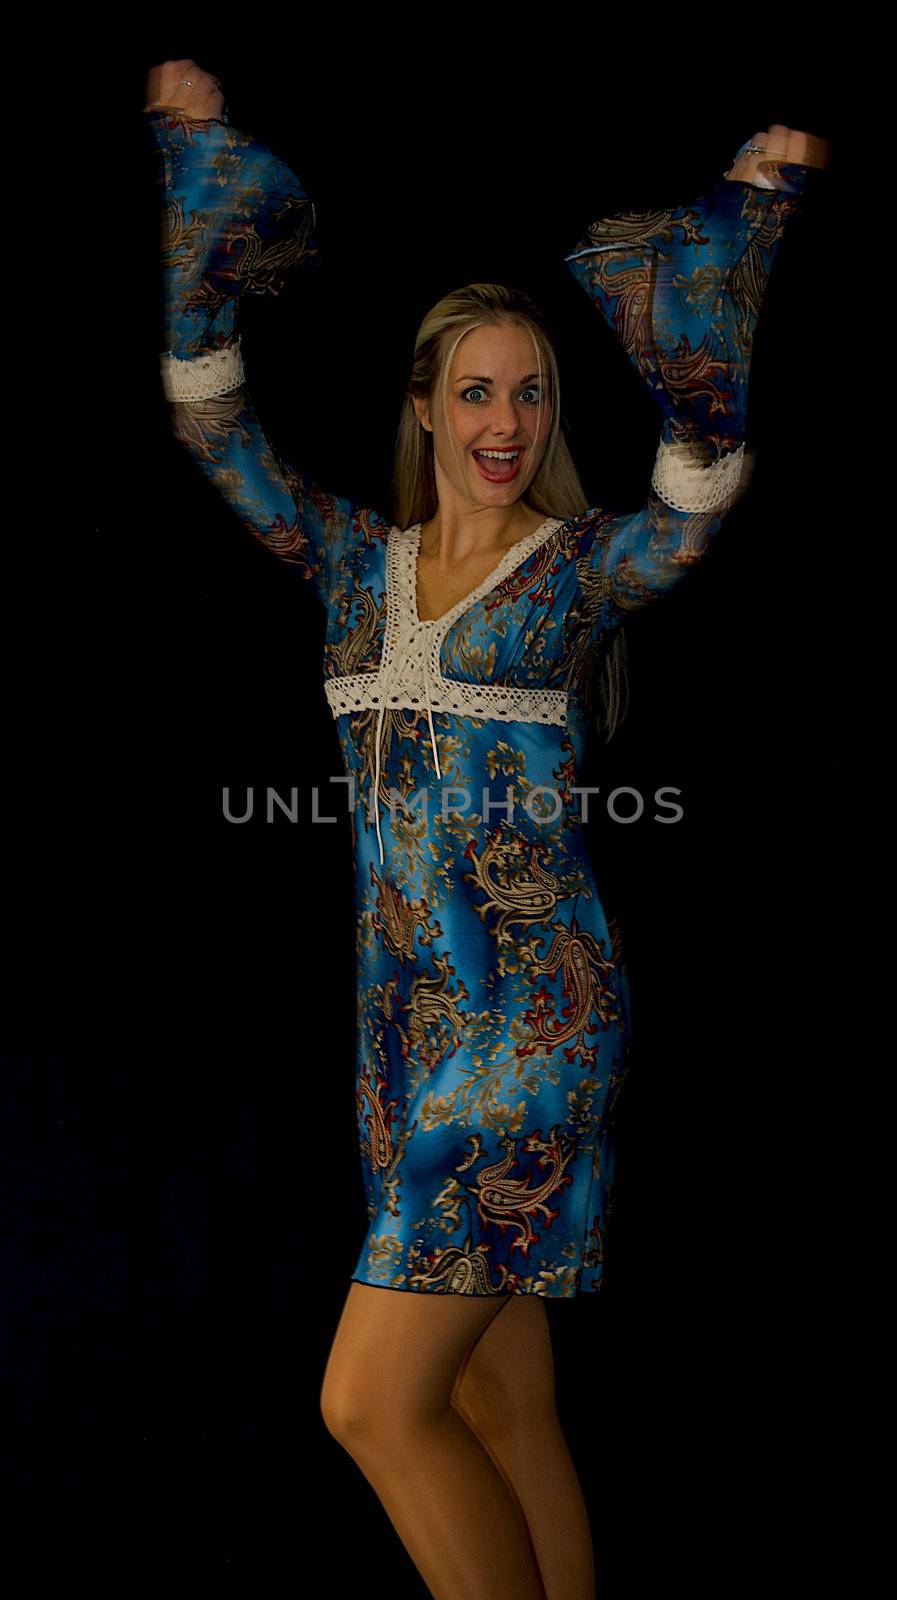 Beautiful blonde woman standing up with arms thrown up in the air in a pose of excitement.